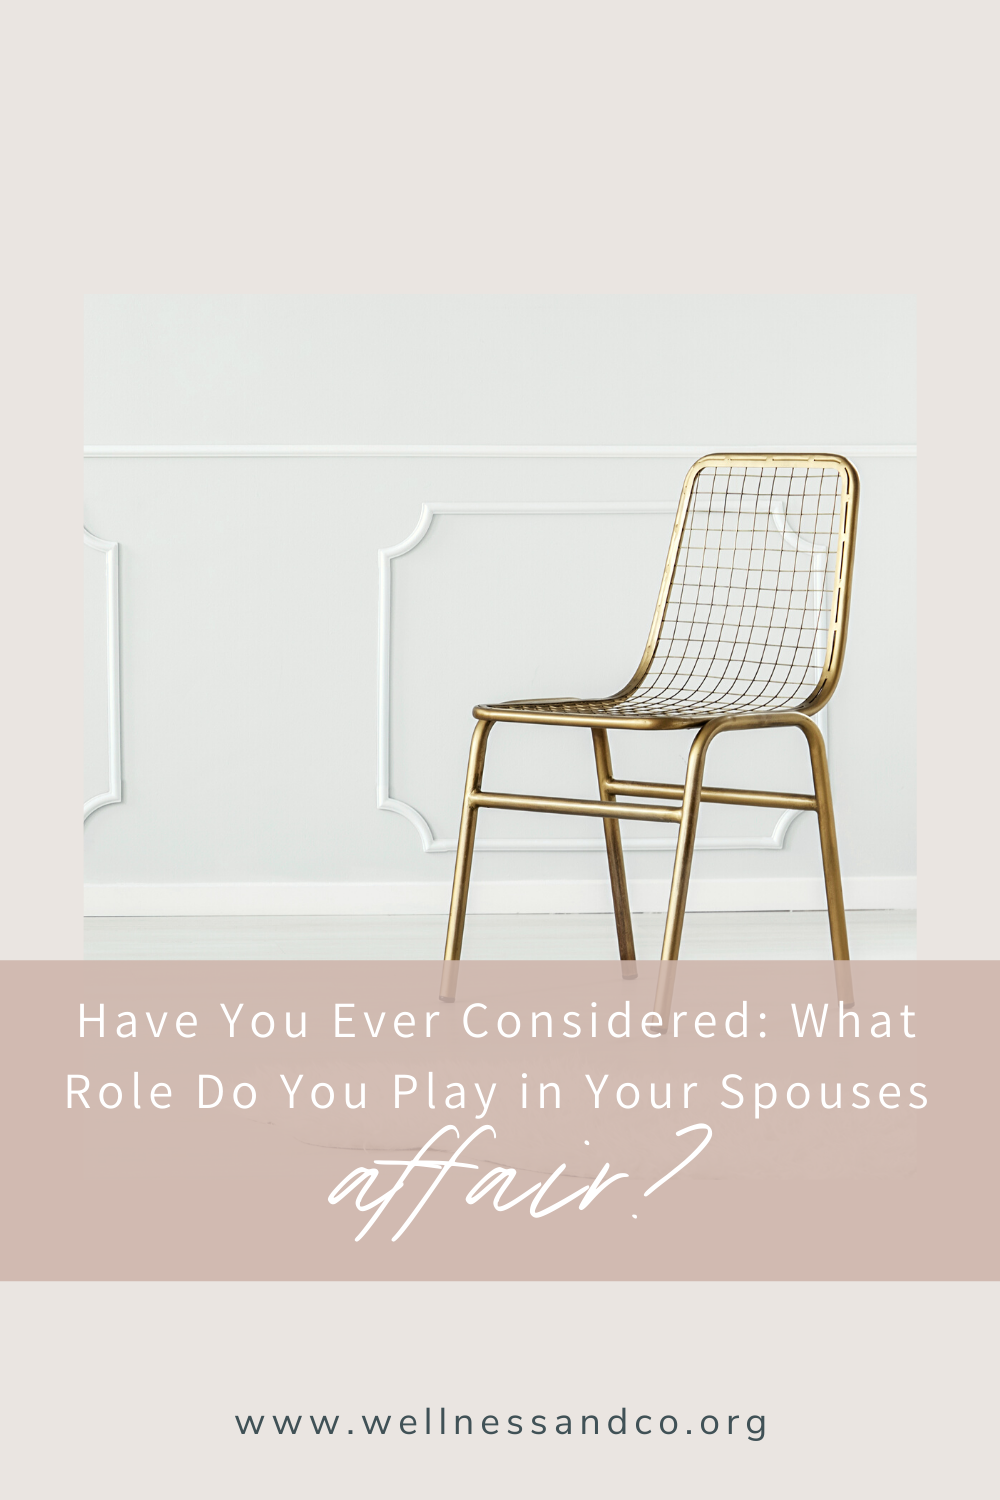 Have You Ever Considered: What Role Do You Play in Your Spouses Affair? | Infidelity can be one of the most painful wounds for couples to recover from. But it's not impossible. In fact, many couples come out stronger than ever after a wound like this. This blog post shares a clip of what some couples struggle with in the healing process - forgiveness and recognizing the role each partner plays. Take a look through the eyes of a therapist!